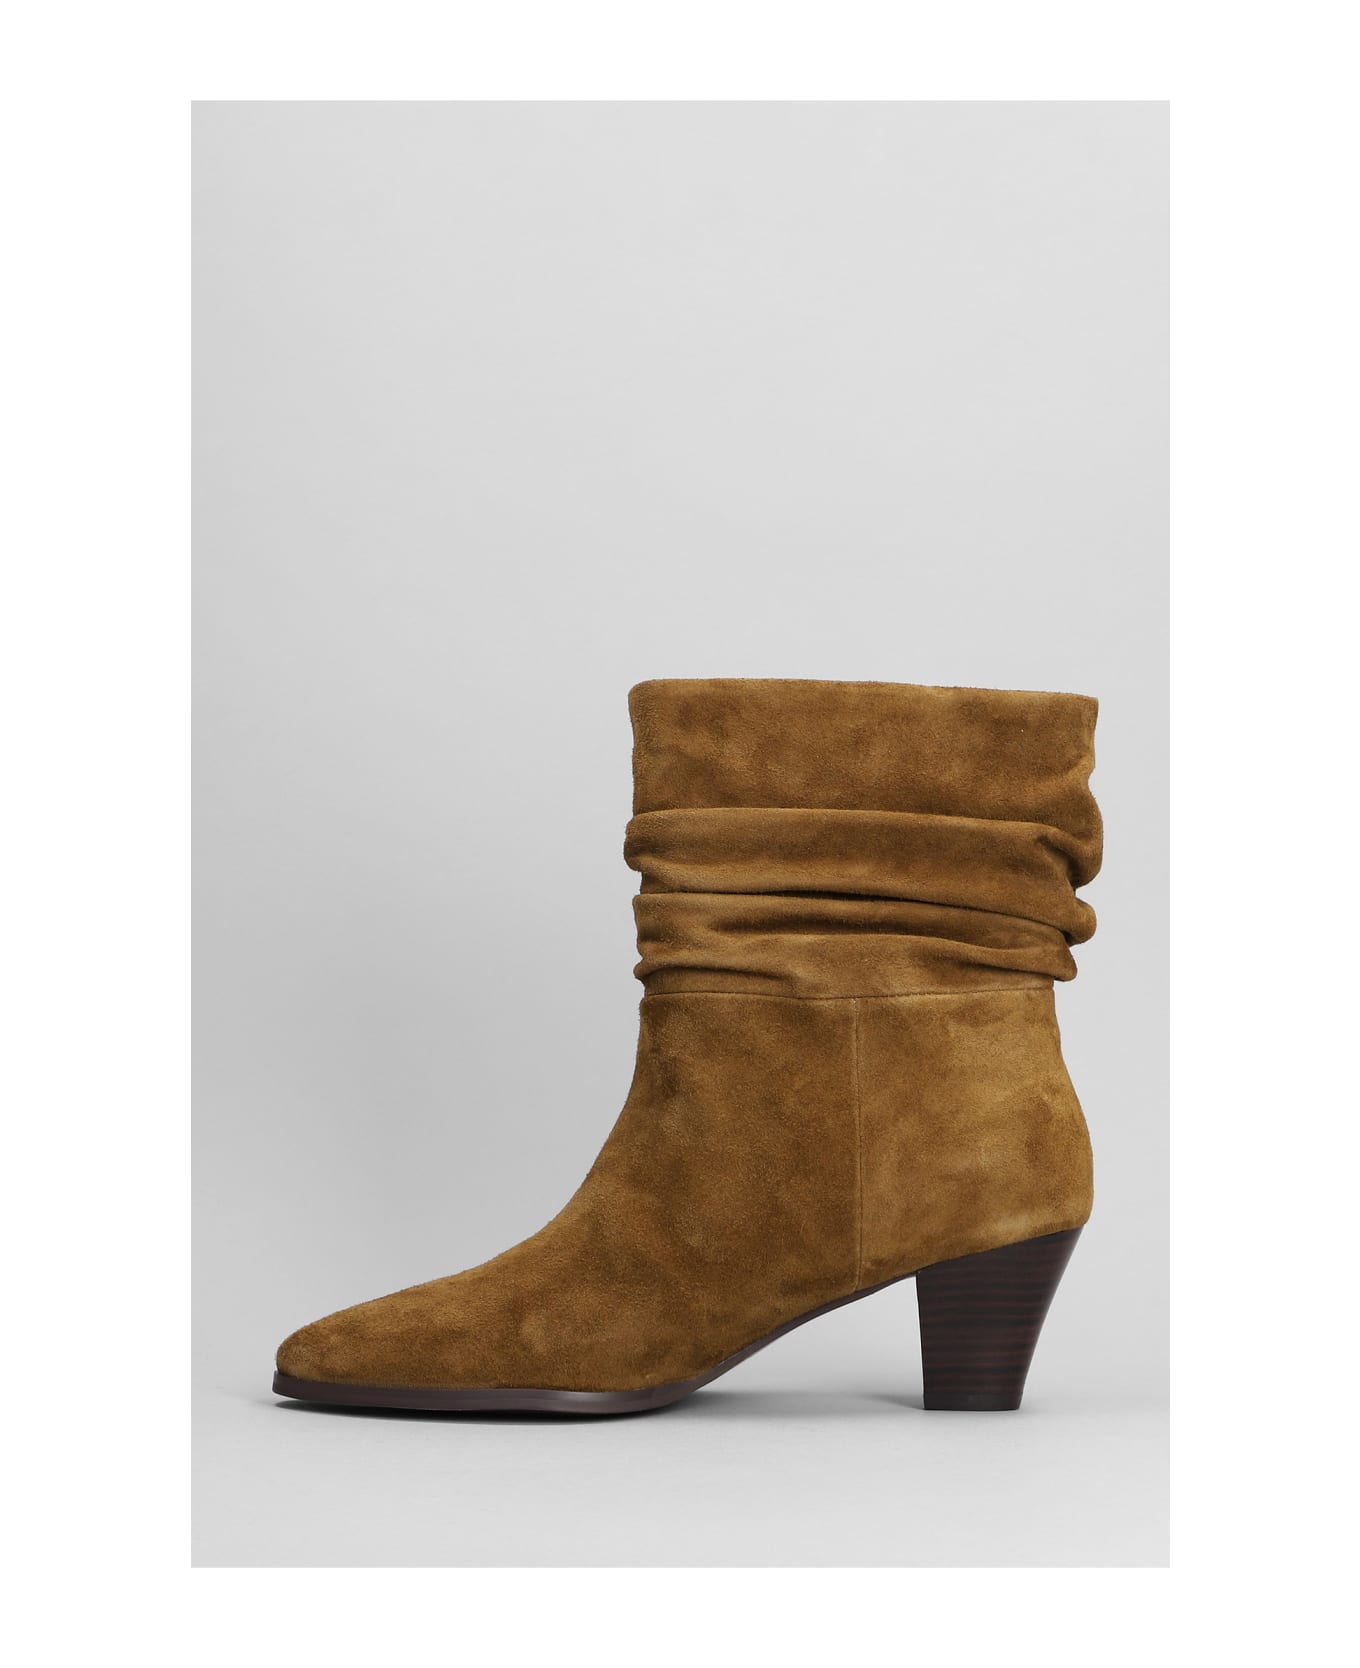 Bibi Lou High Heels Ankle Boots In Leather Color Suede - leather color